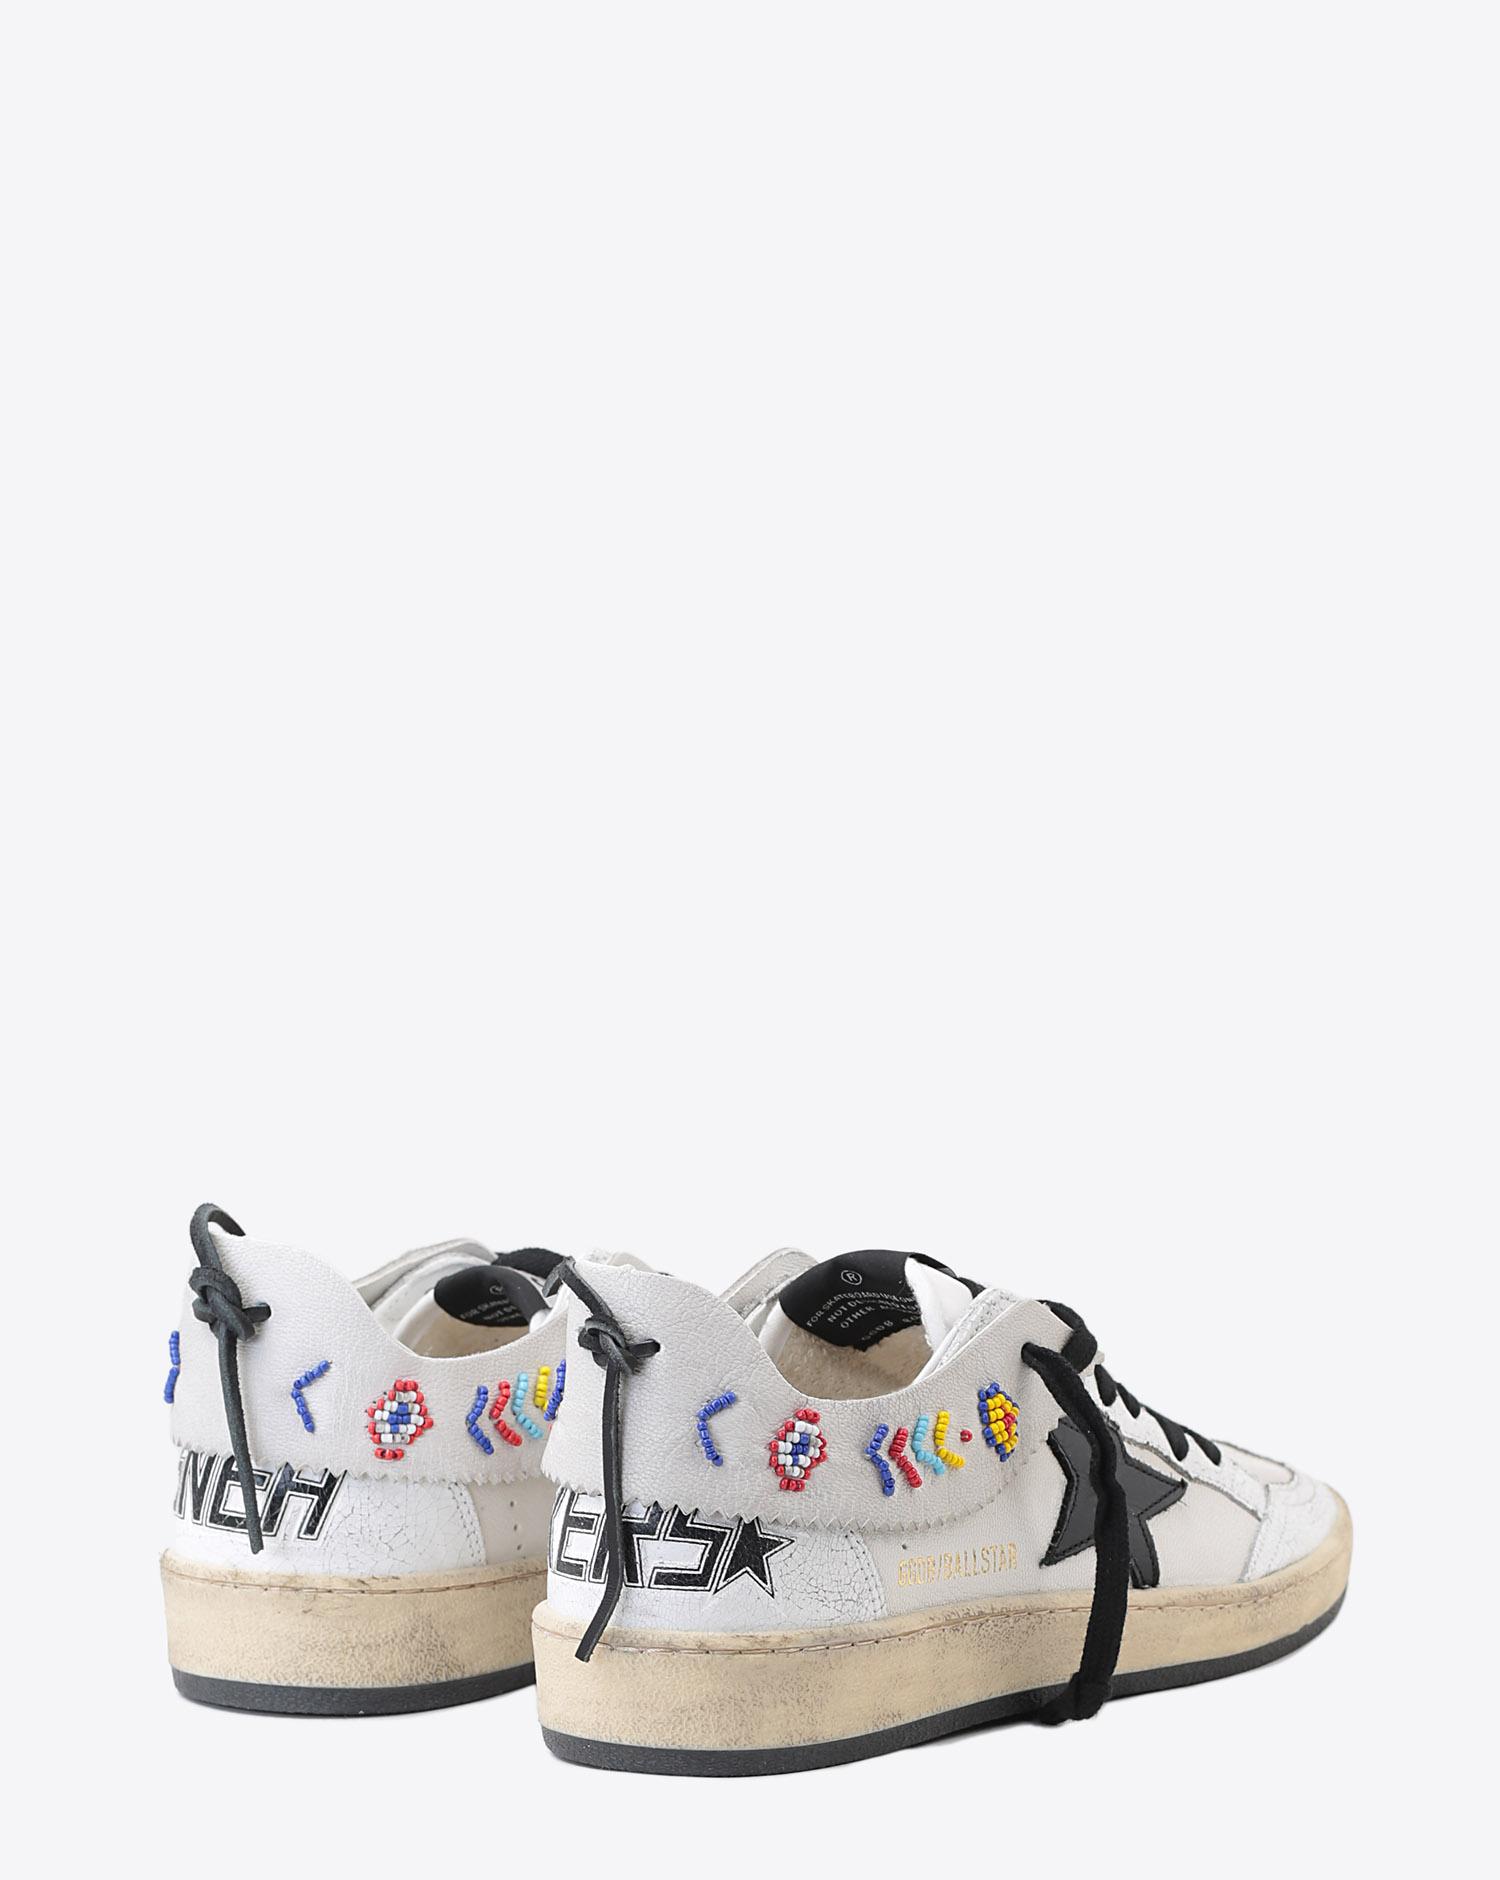 Golden Goose Woman Pré-Collection Sneakers Ball Star - White Leather - Beads 